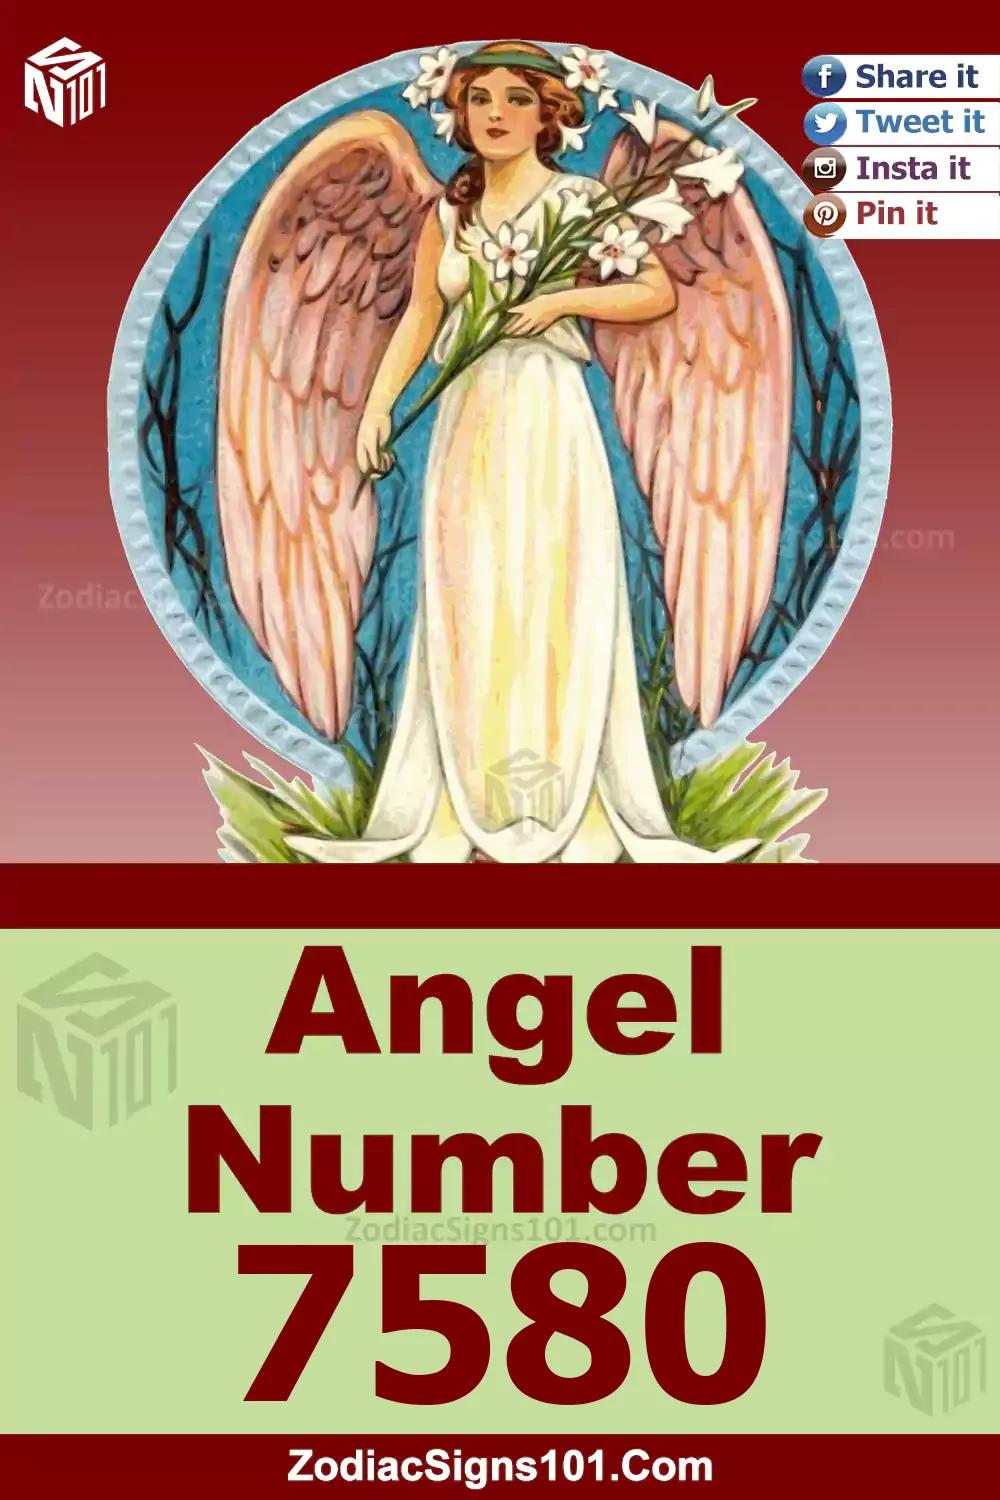 7580 Angel Number Meaning